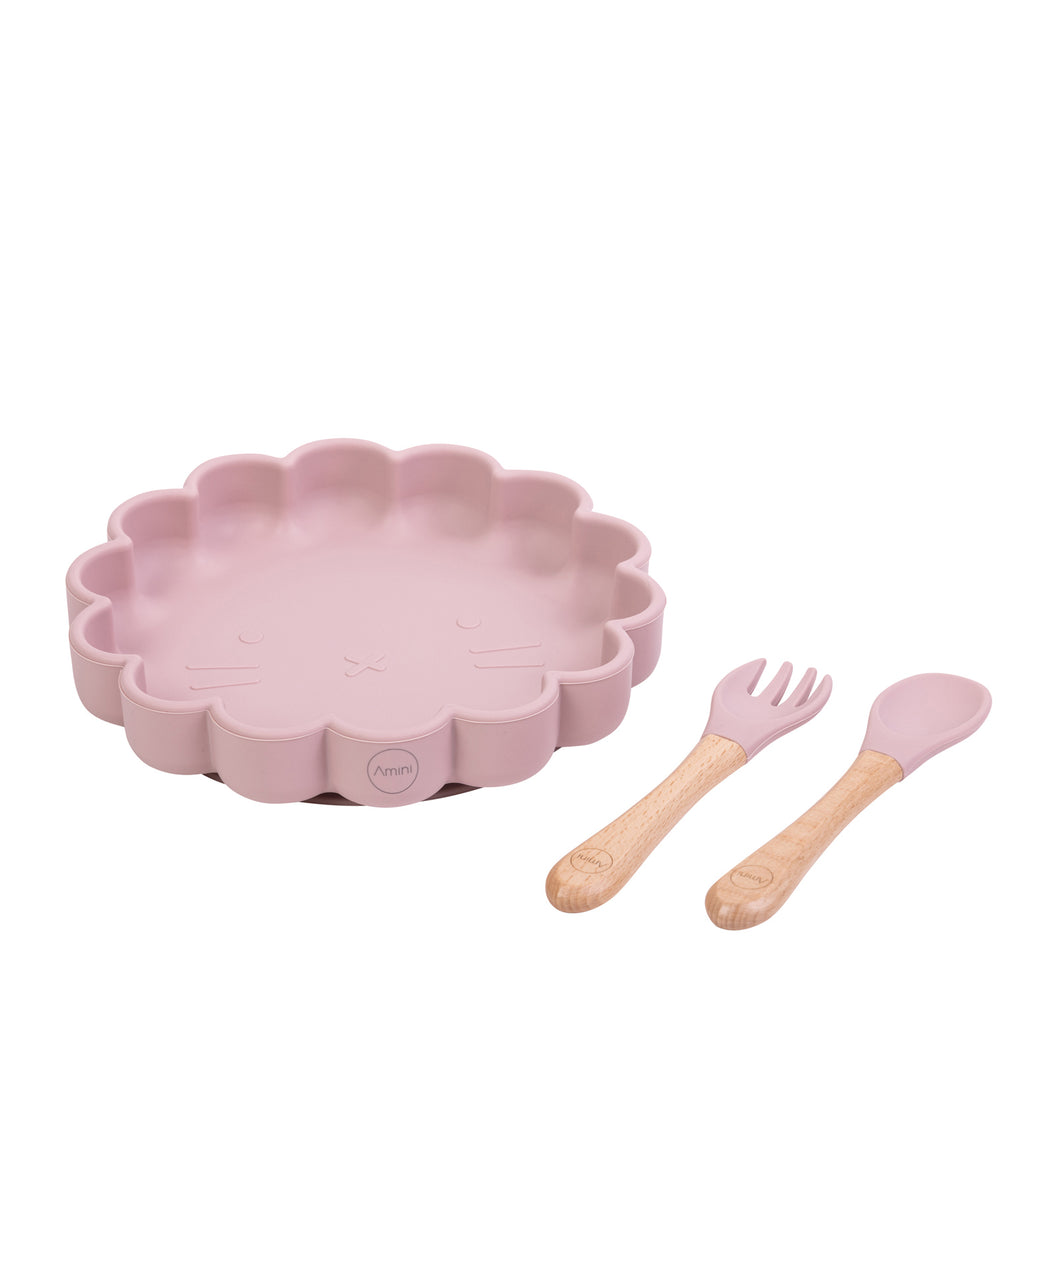 kids Plate with silicon/bamboo spoon and fork Pink by Amini